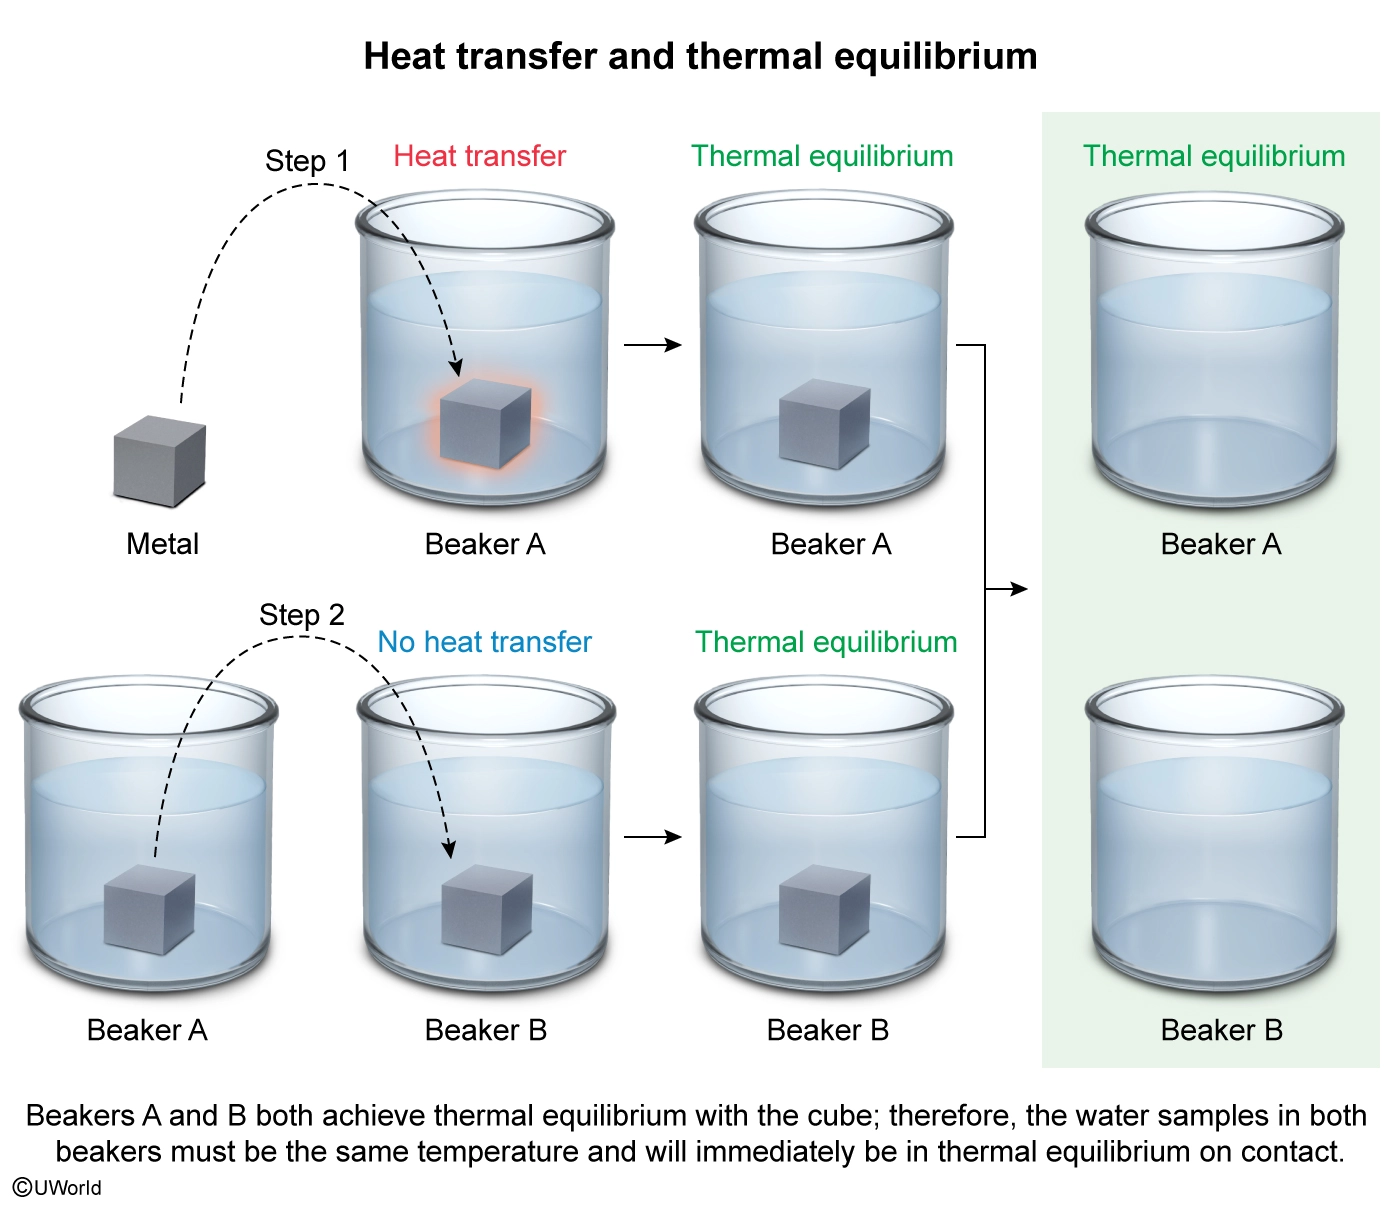 Application of the Zeroth Law of Thermodynamics